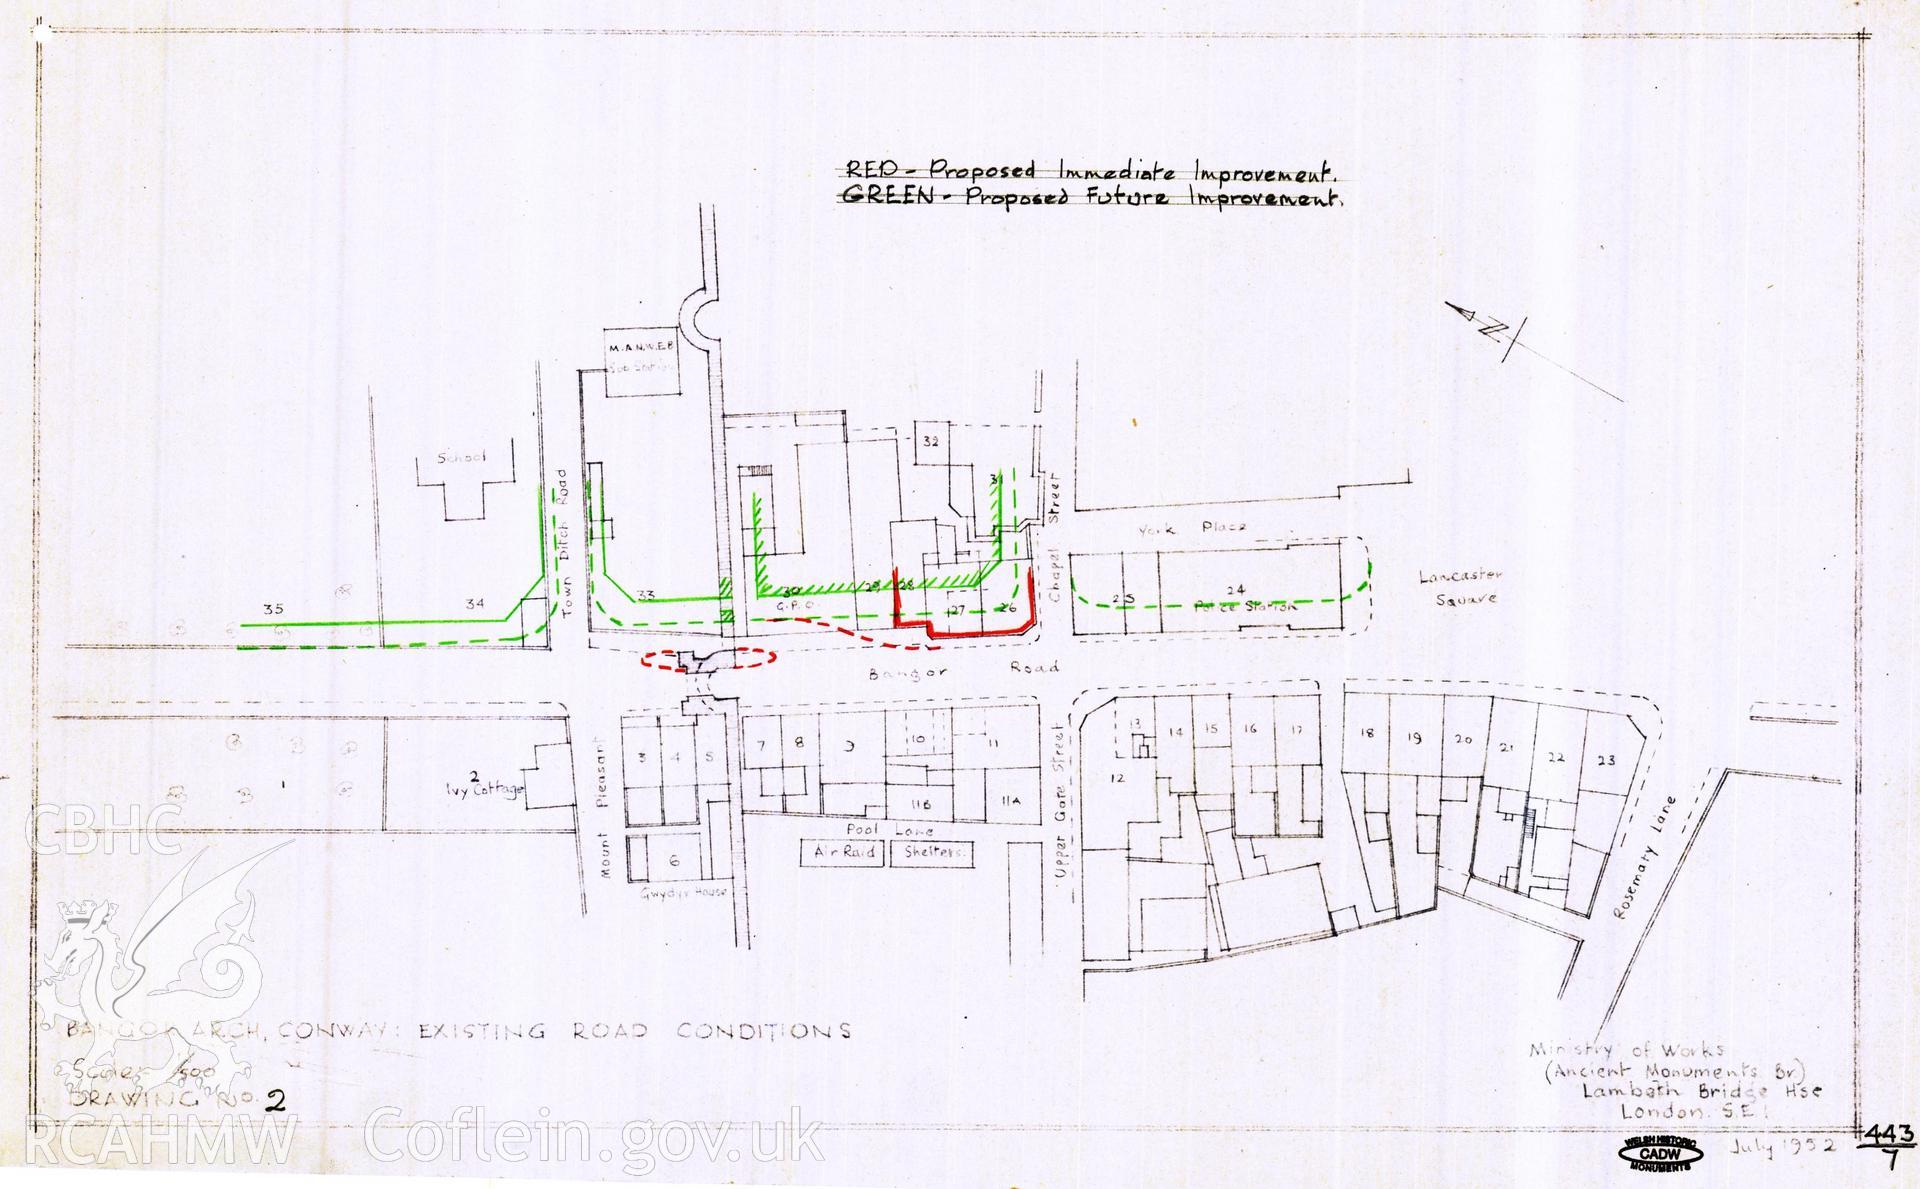 Cadw guardianship monument drawing of Conwy Walls. Tower 10+ Bangor Rd, road scheme. Cadw Ref. No:443/7. Scale 1:500.